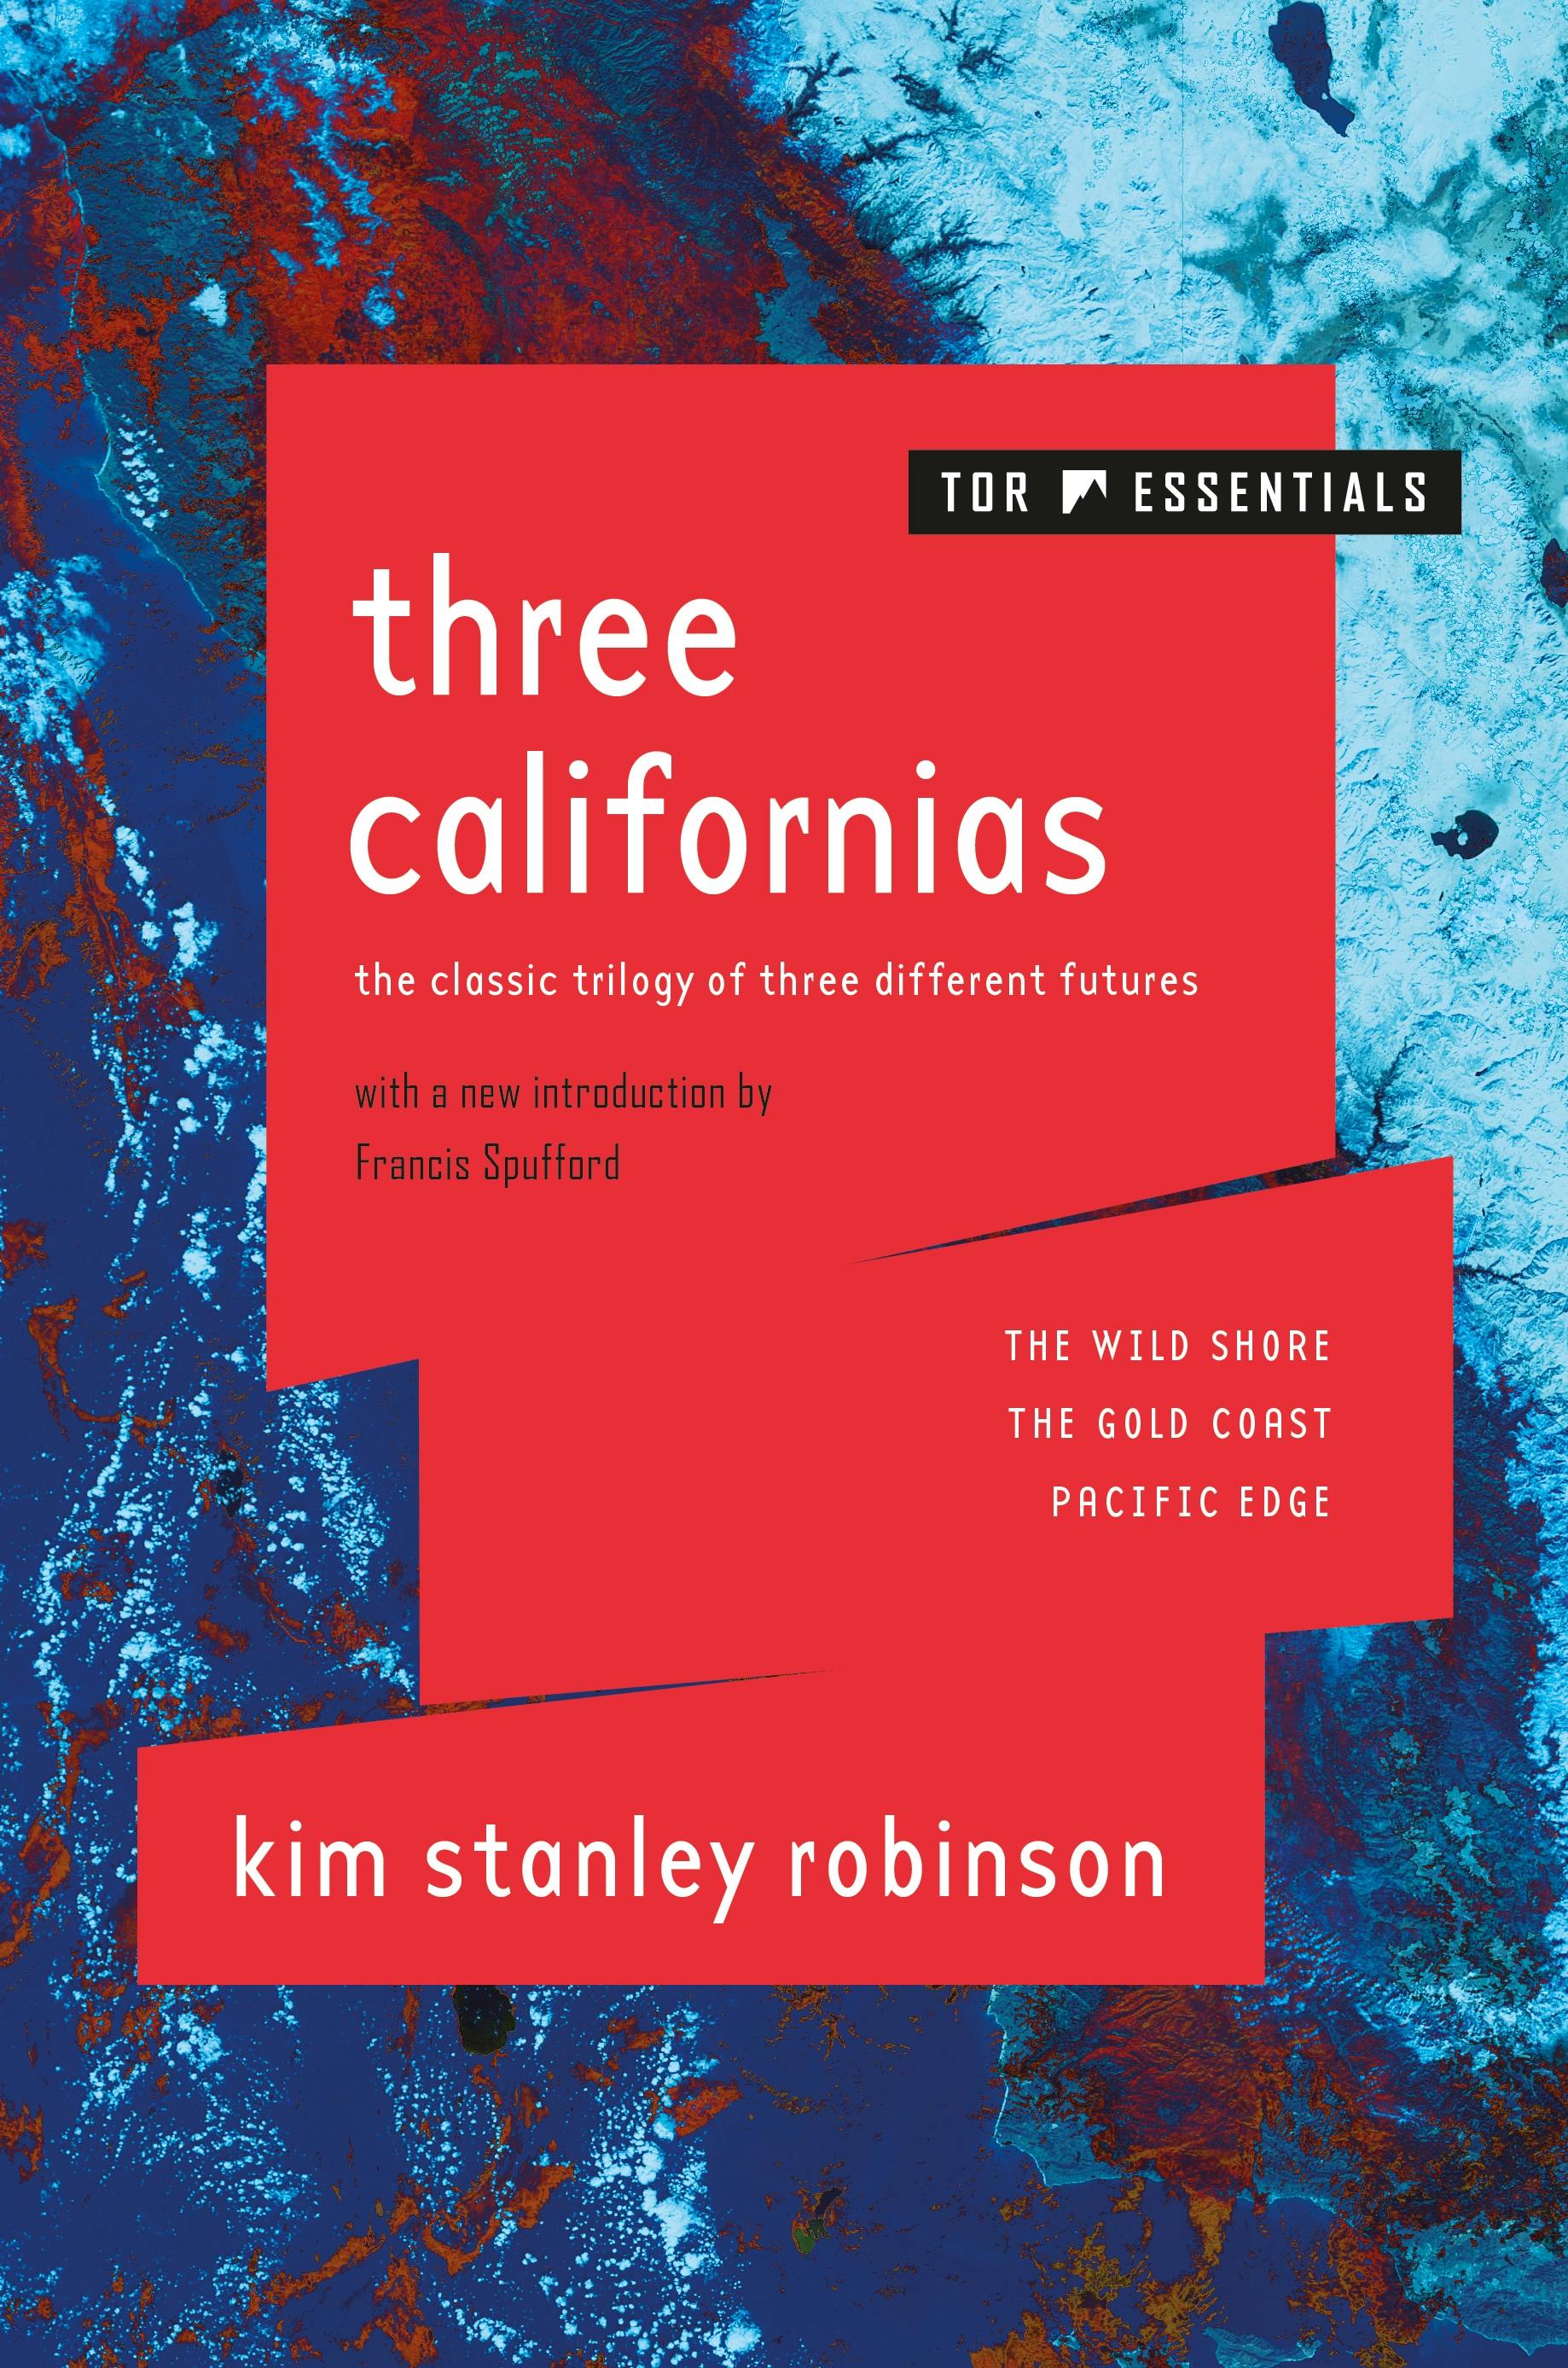 Cover for the book titled as: Three Californias